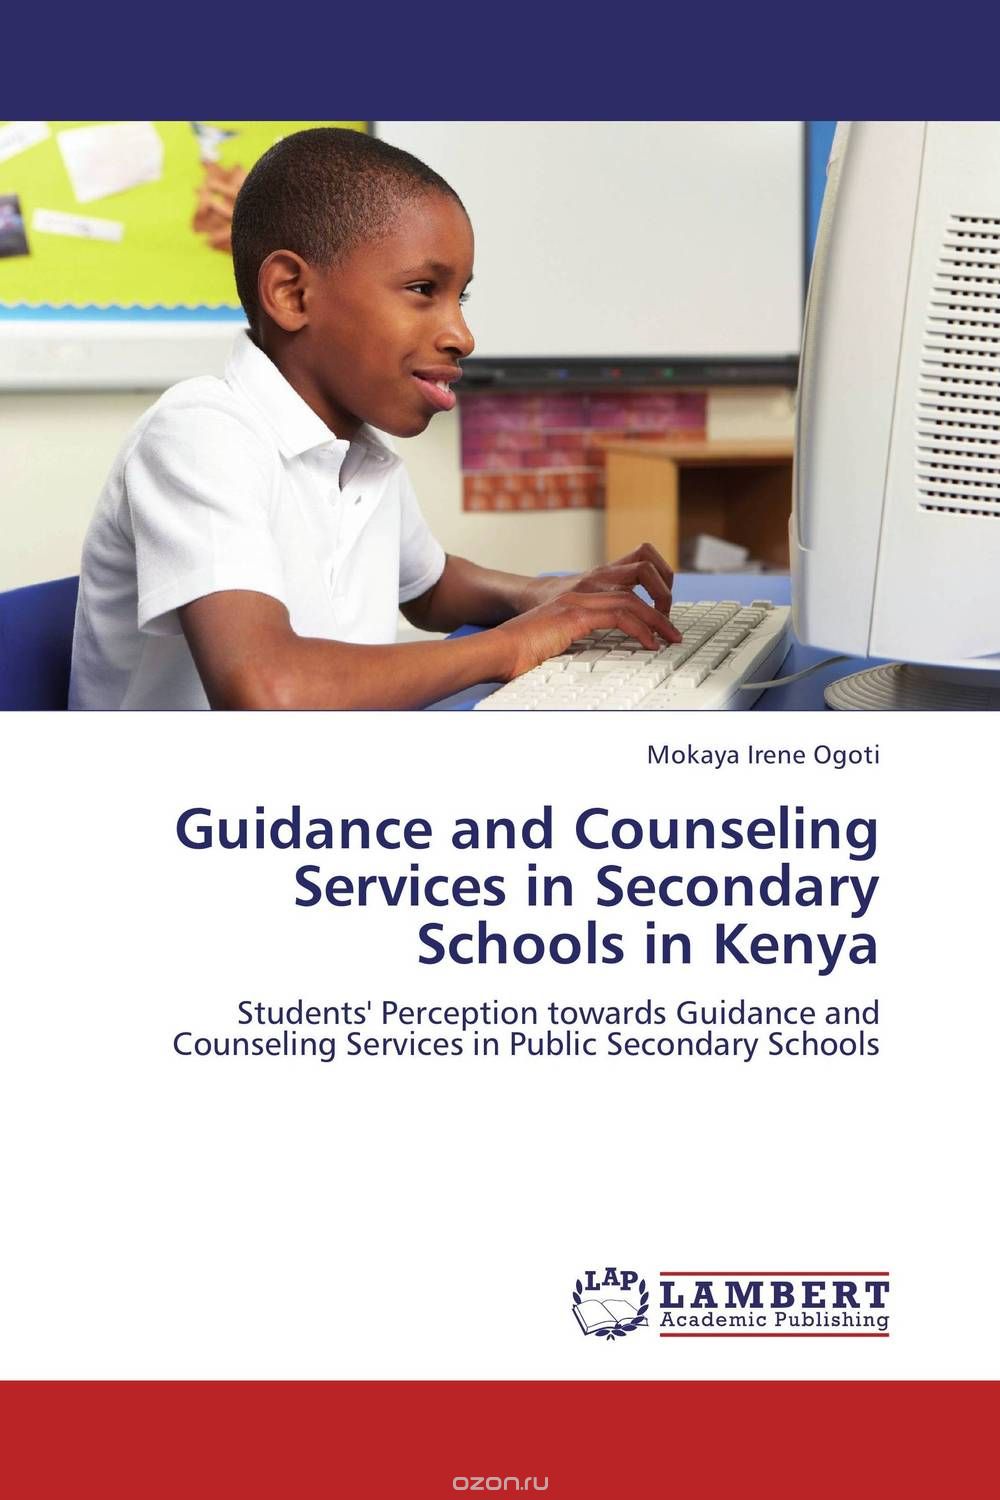 Скачать книгу "Guidance and Counseling Services in Secondary Schools in Kenya"